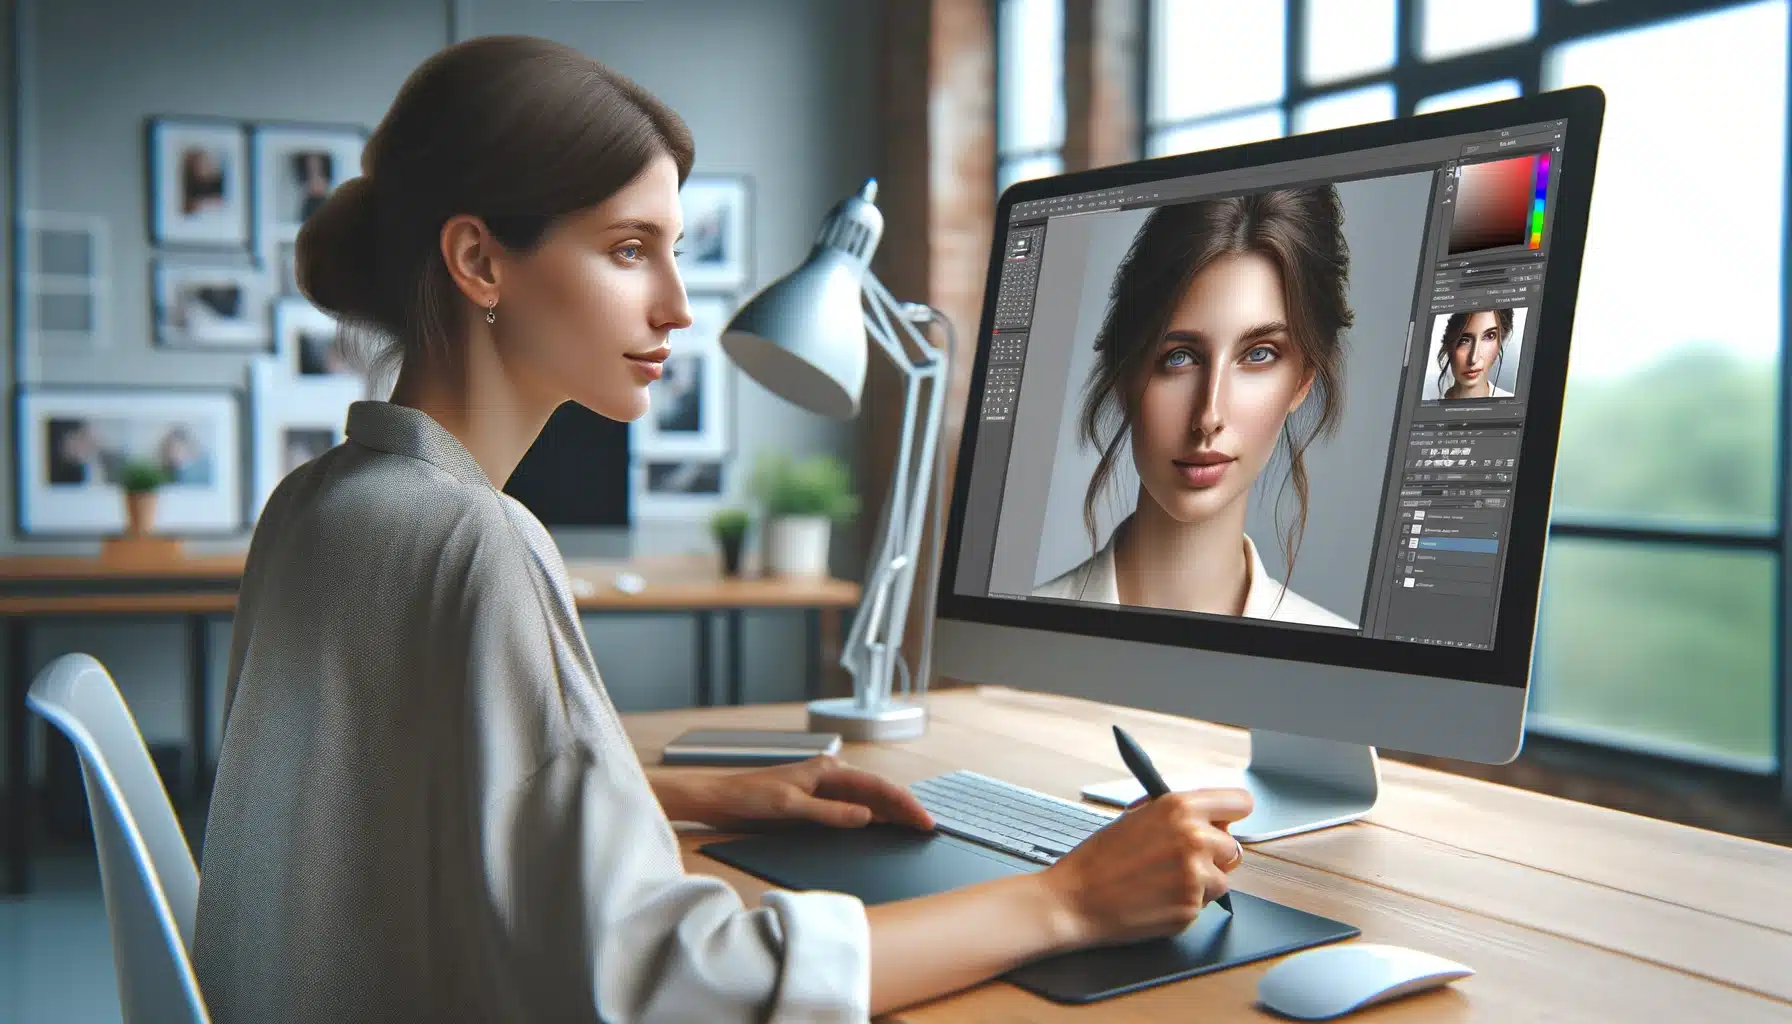 Digital artist enhancing a portrait photo using skin smoothing techniques in Photoshop on a computer